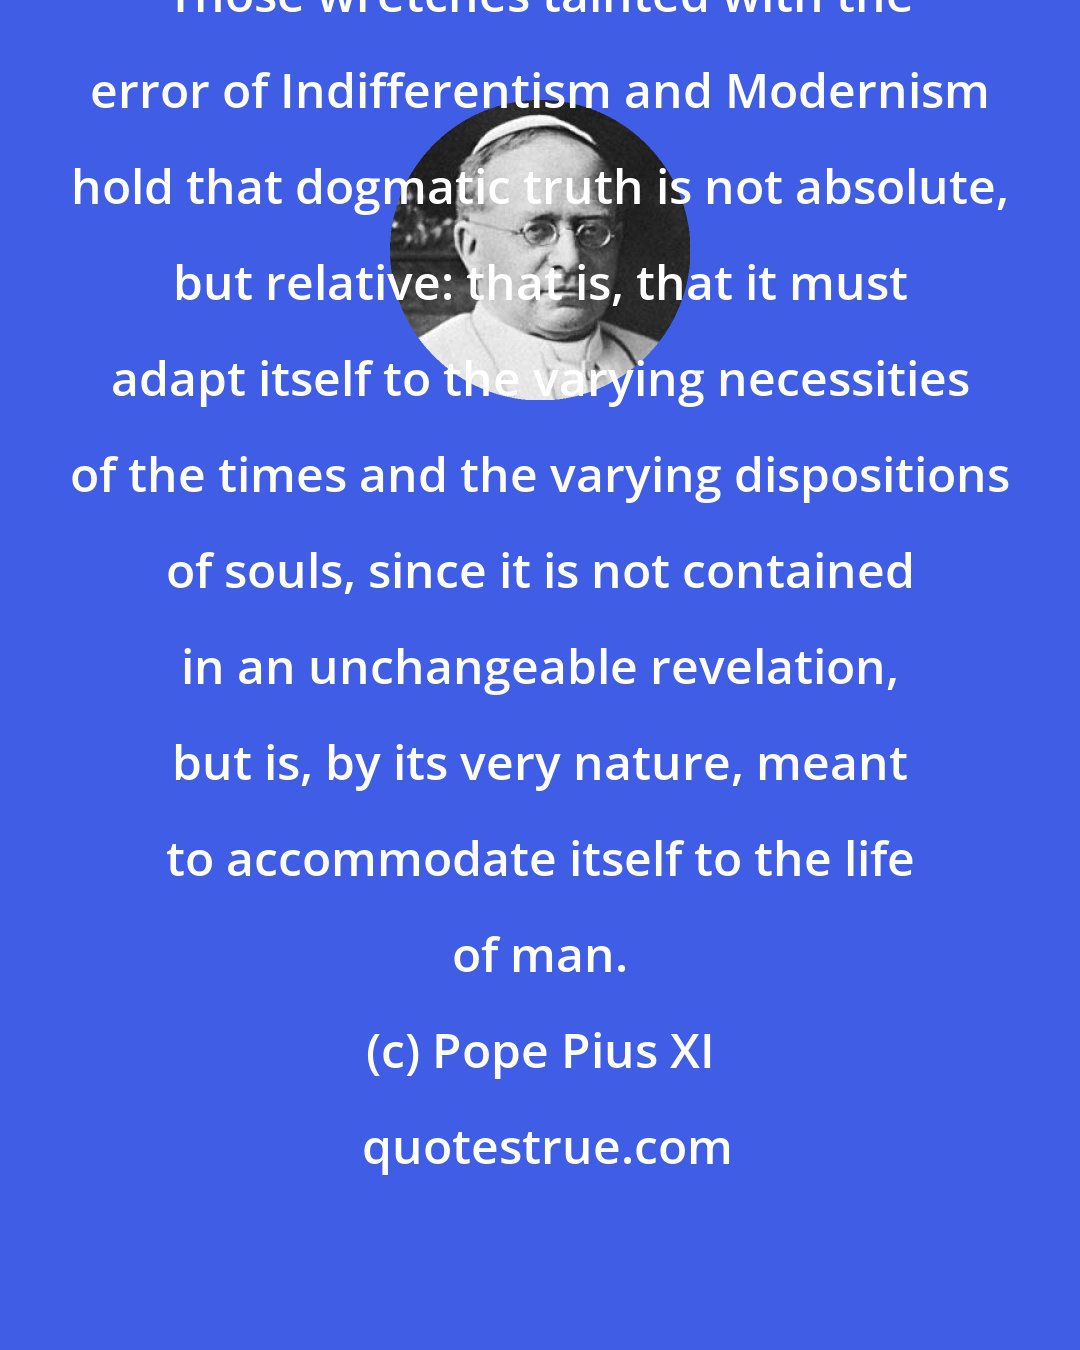 Pope Pius XI: Those wretches tainted with the error of Indifferentism and Modernism hold that dogmatic truth is not absolute, but relative: that is, that it must adapt itself to the varying necessities of the times and the varying dispositions of souls, since it is not contained in an unchangeable revelation, but is, by its very nature, meant to accommodate itself to the life of man.